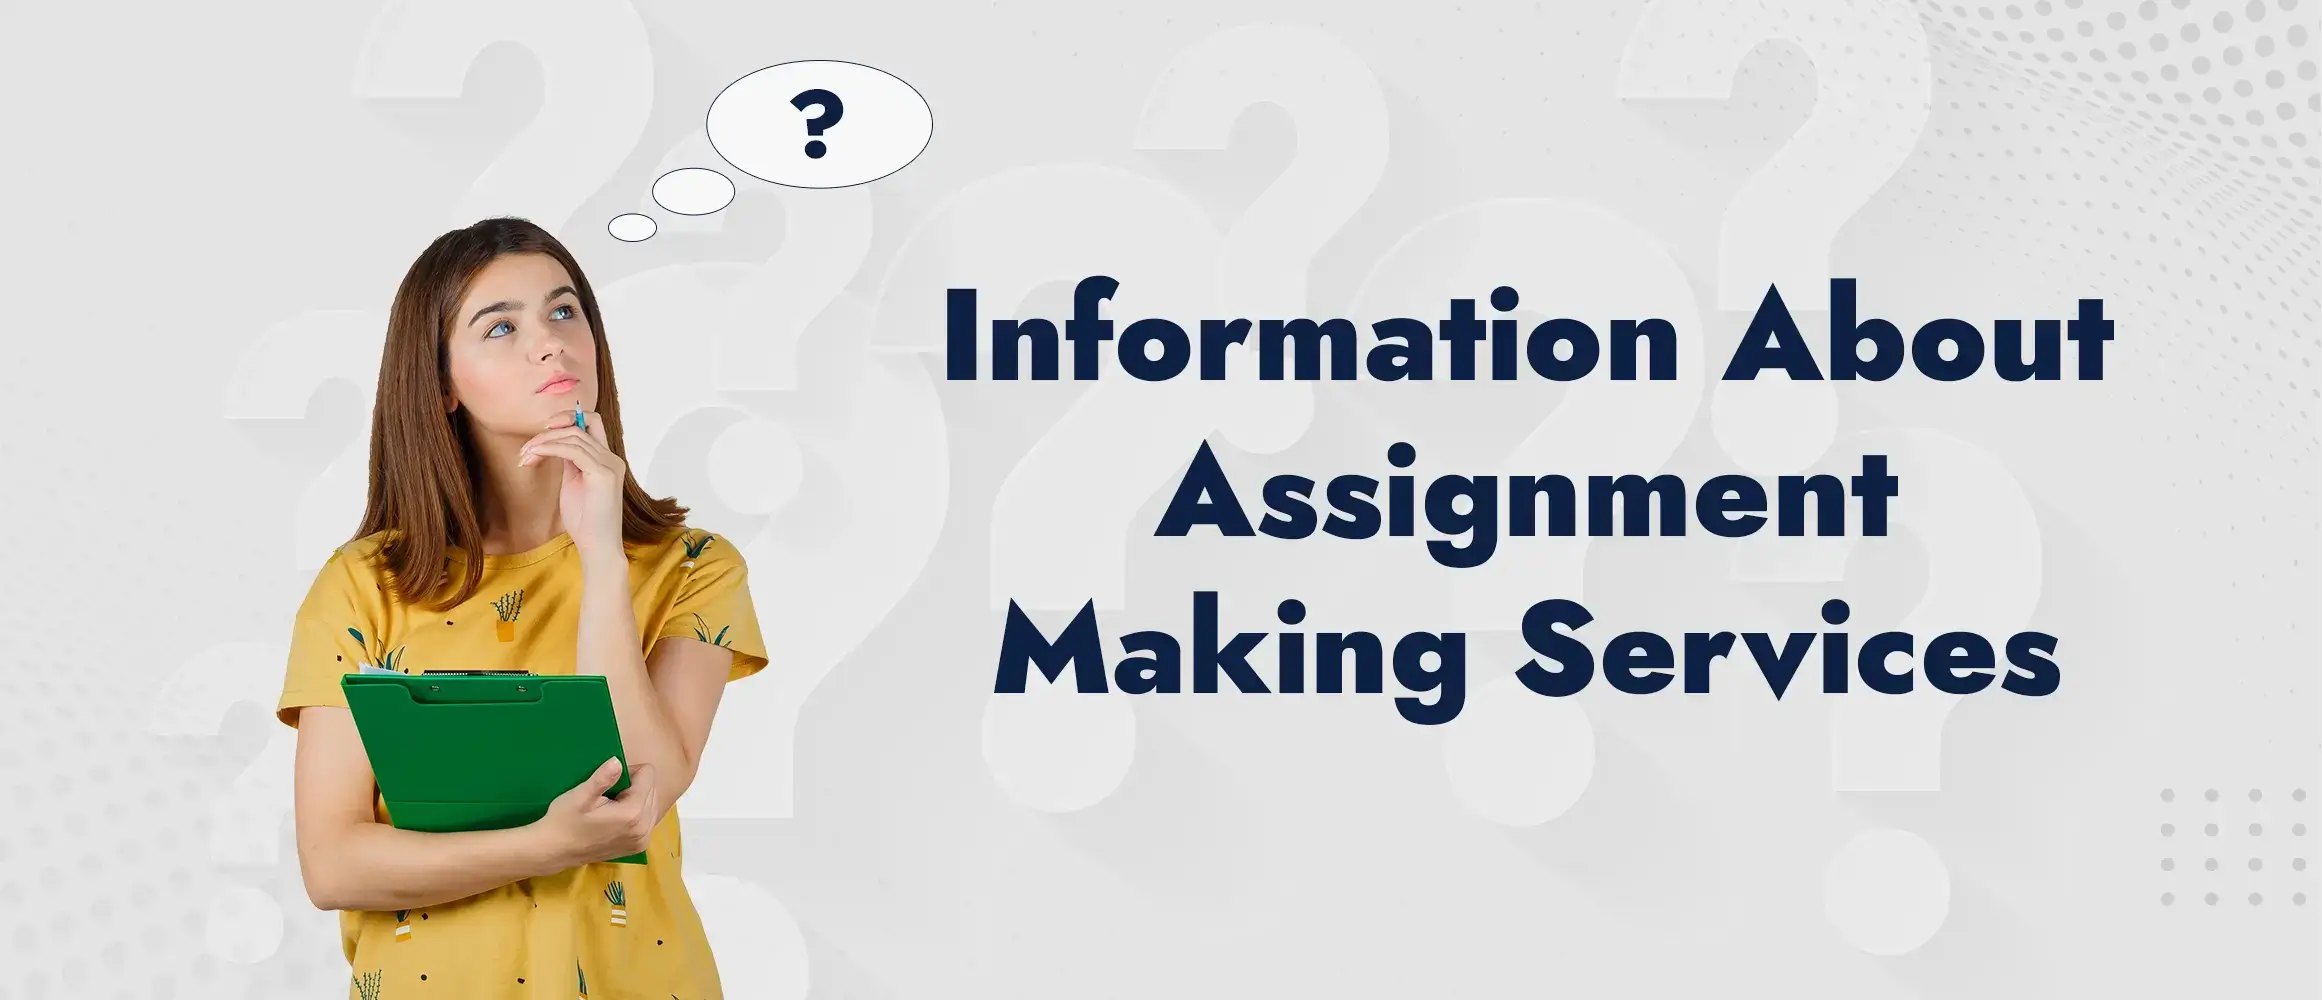 What Information to Share with Assignment Making Services